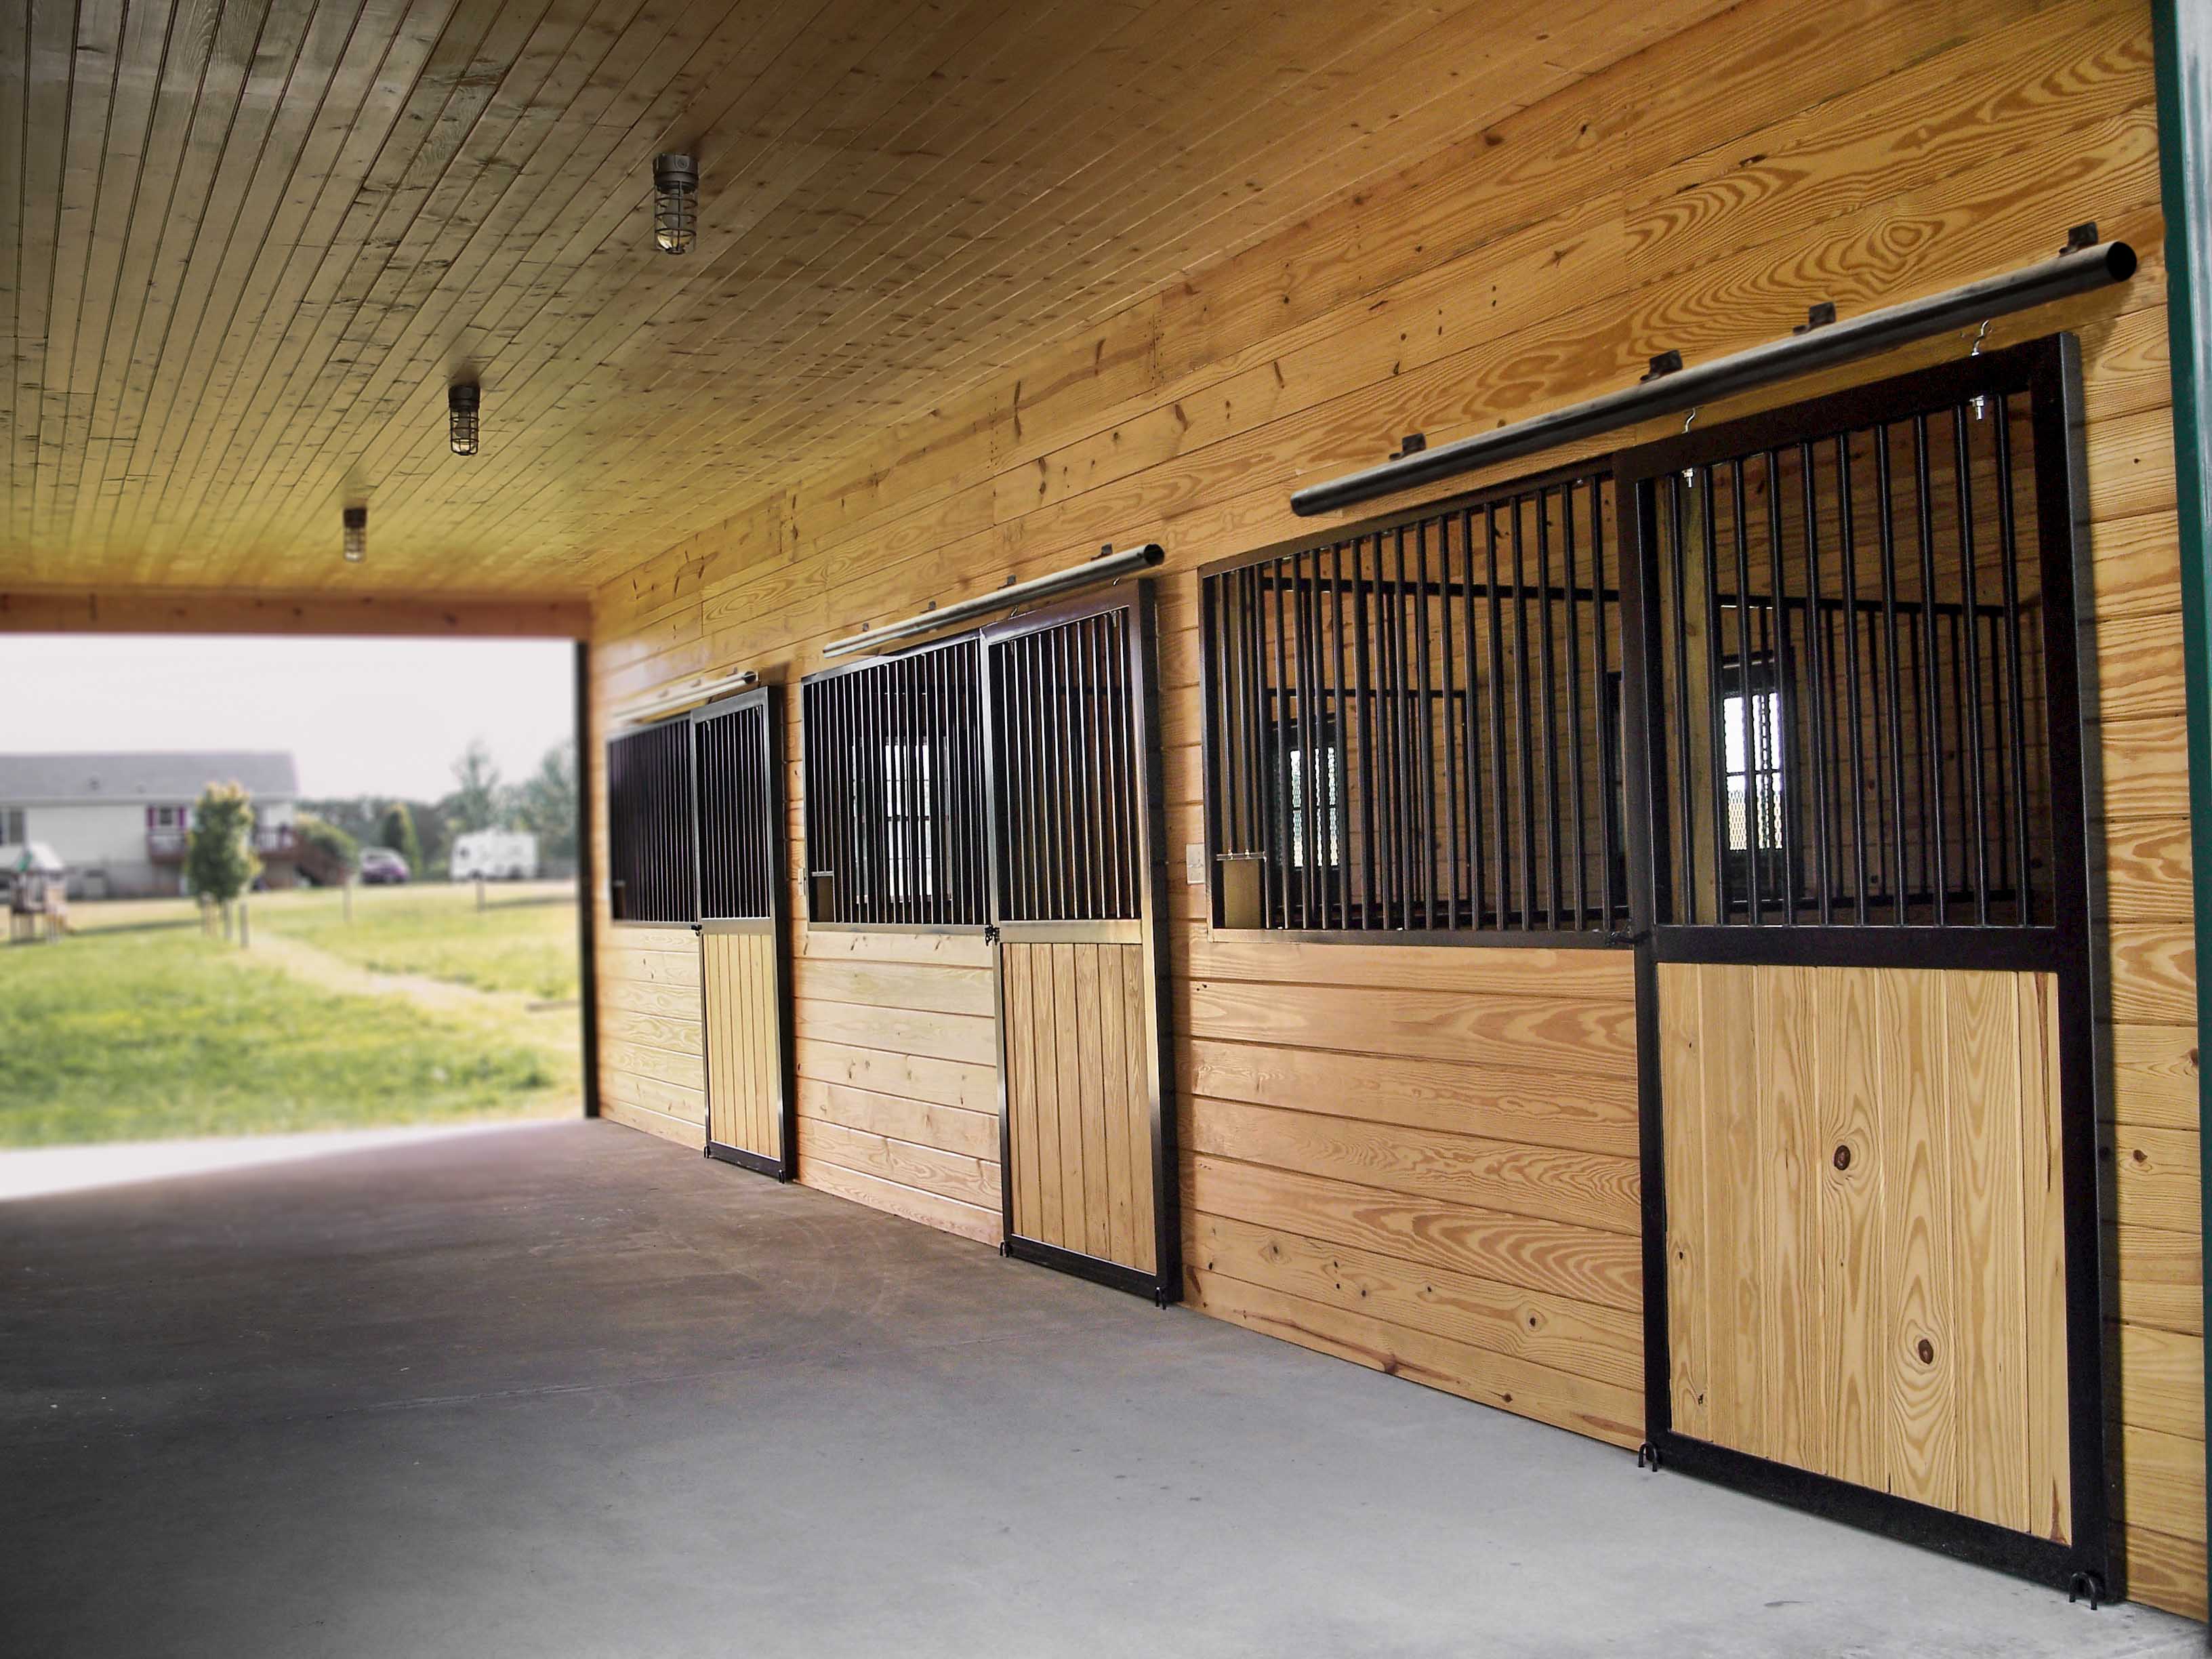 40++ Used horse stalls for sale in michigan ideas